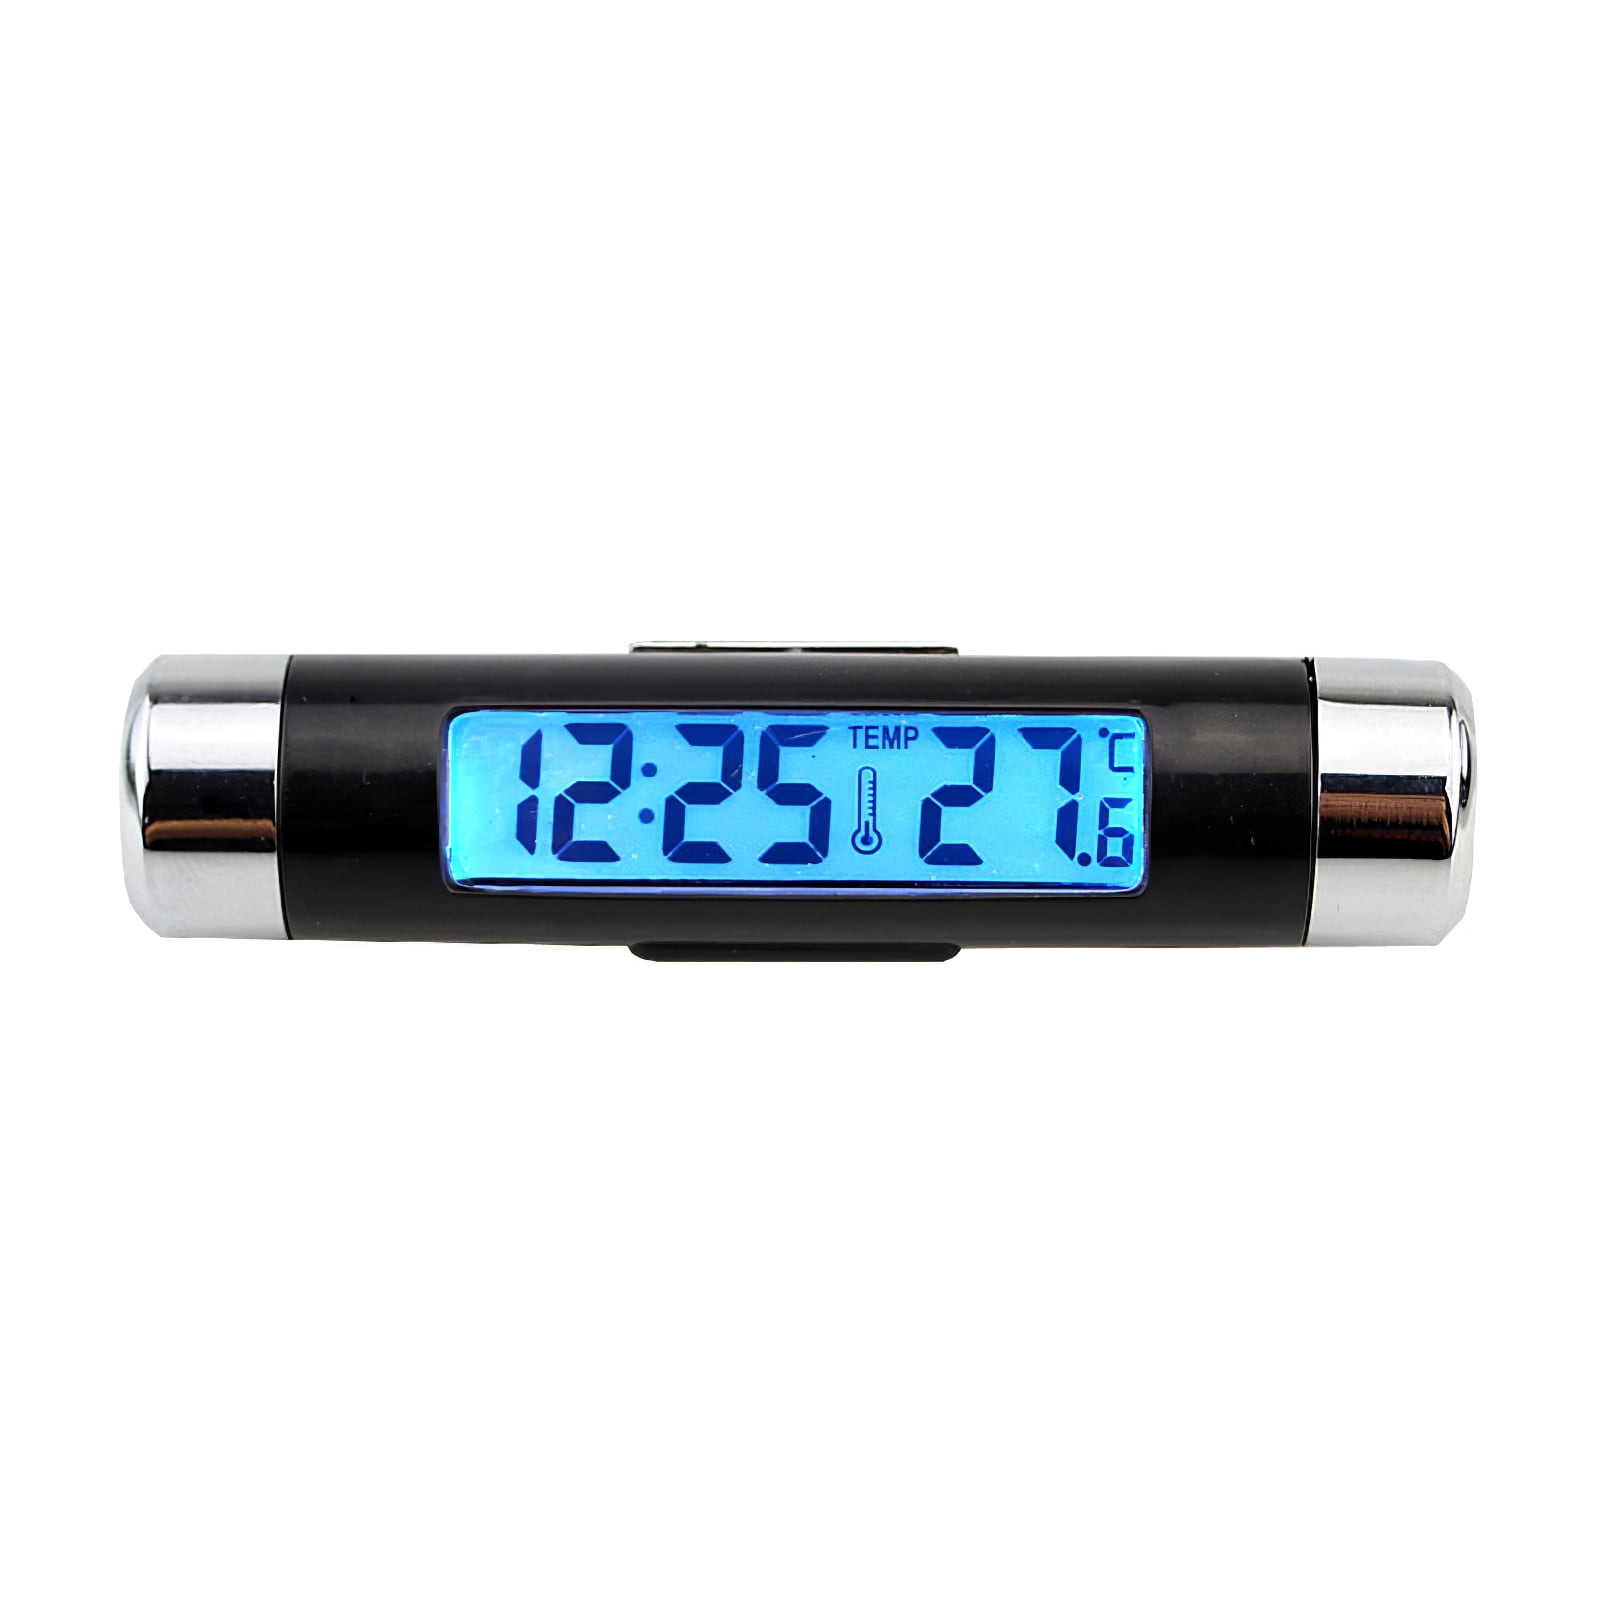 White LCD Digita Clock with Backlight Display Temperature Monitor Clip-on for Truck Car 